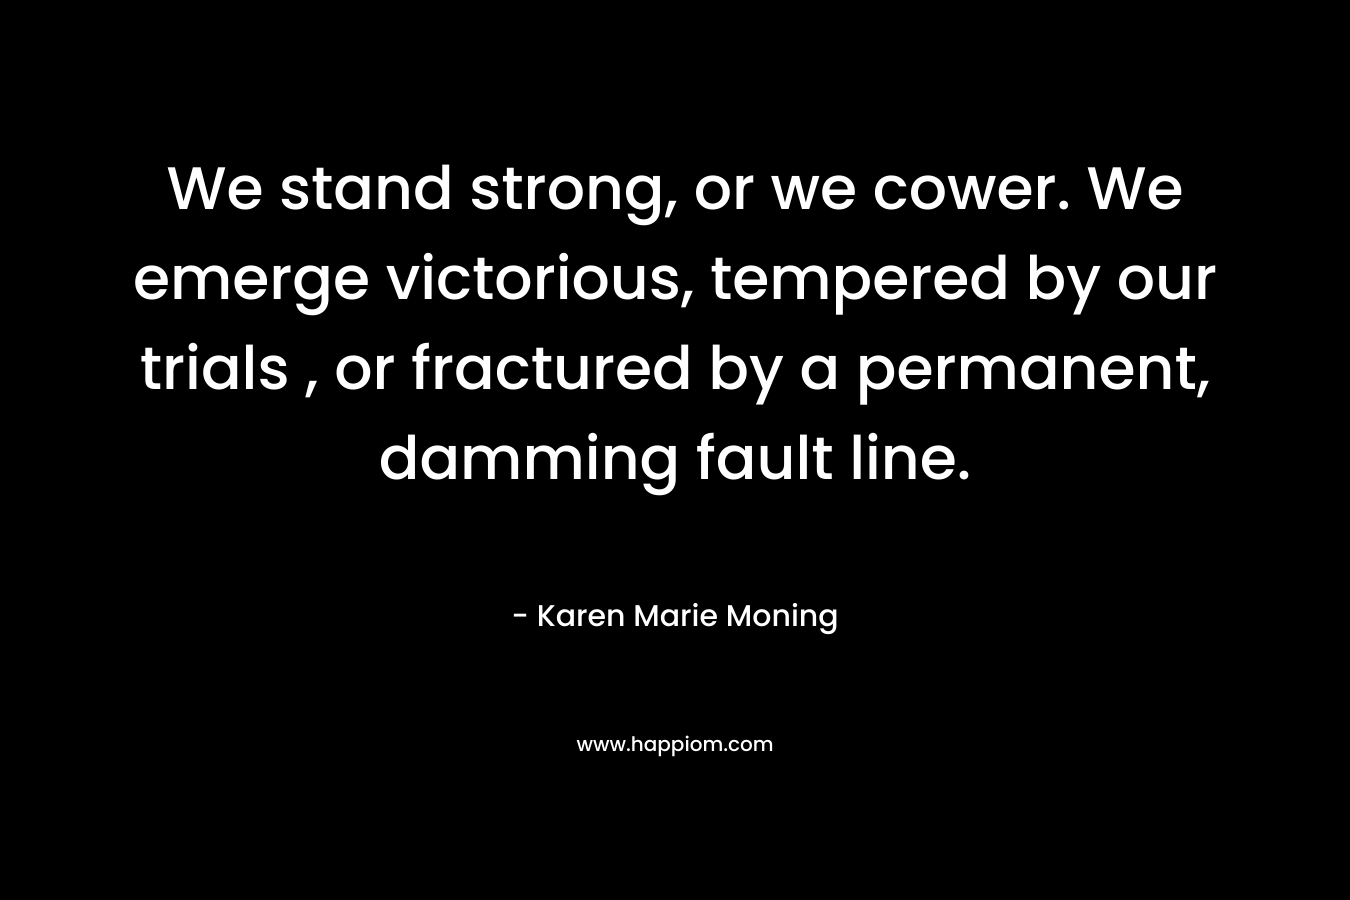 We stand strong, or we cower. We emerge victorious, tempered by our trials , or fractured by a permanent, damming fault line. – Karen Marie Moning